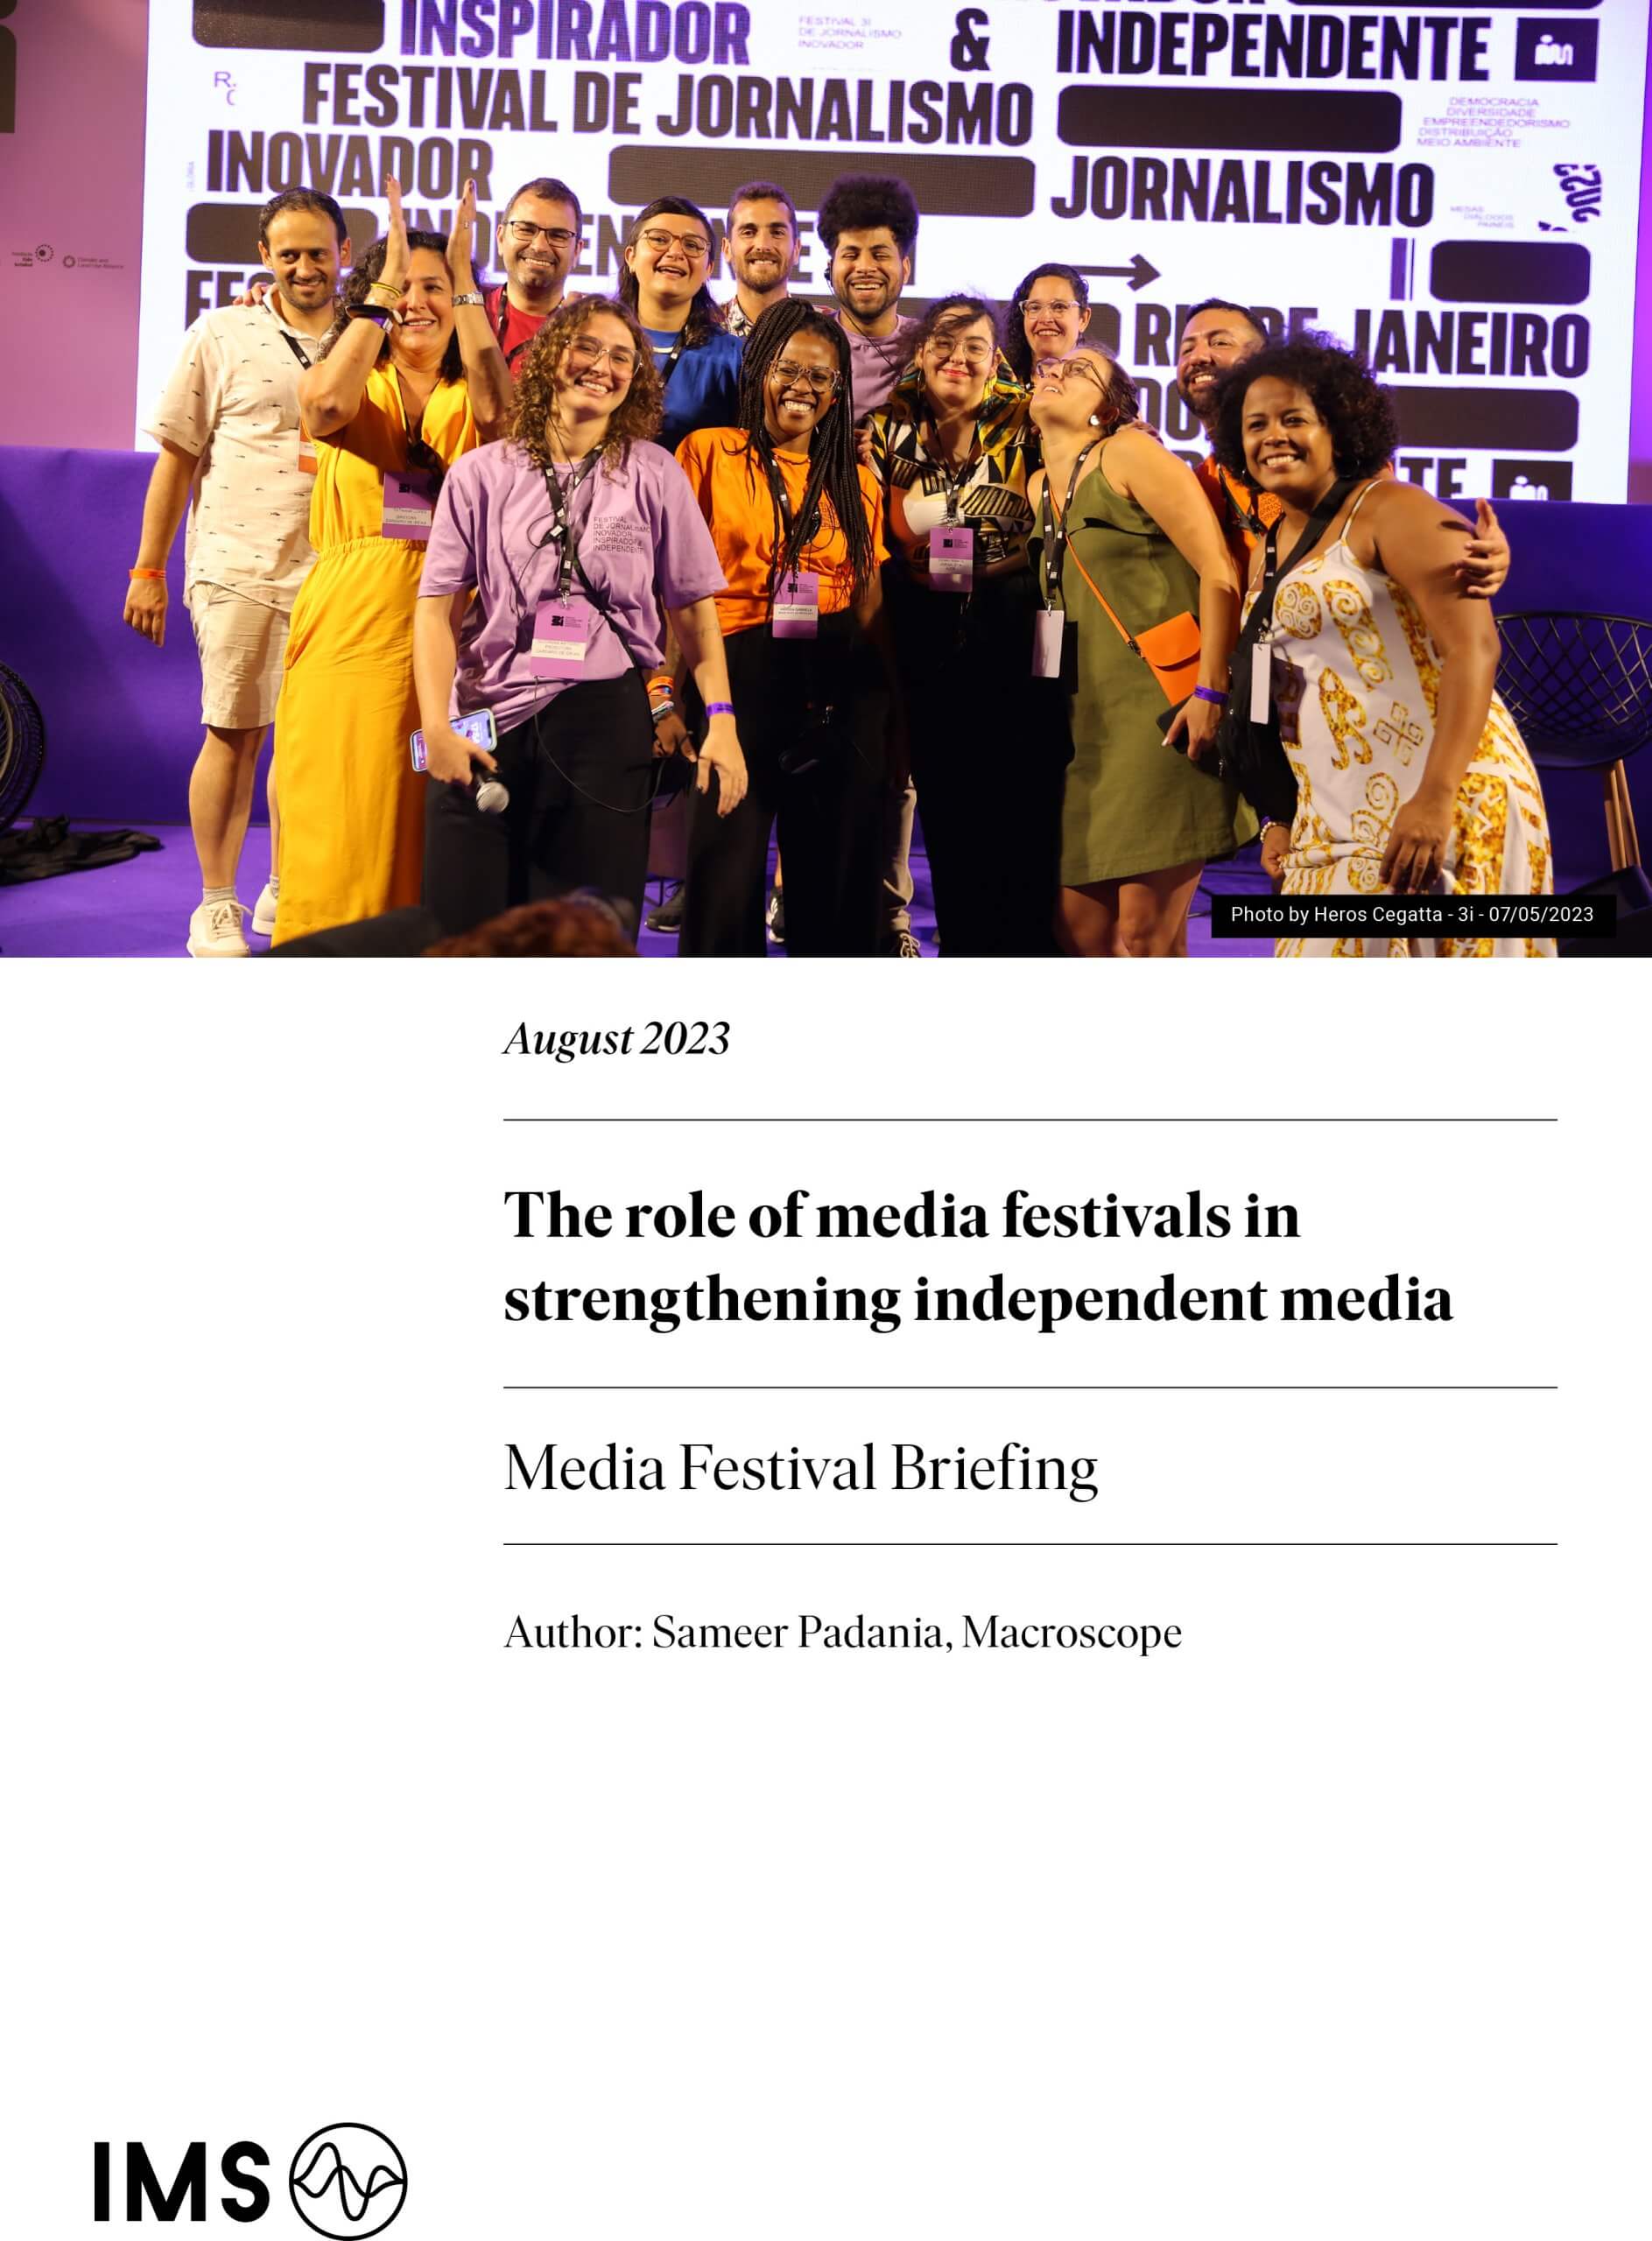 Media festival briefing: The role of media festivals in strengthening independent media